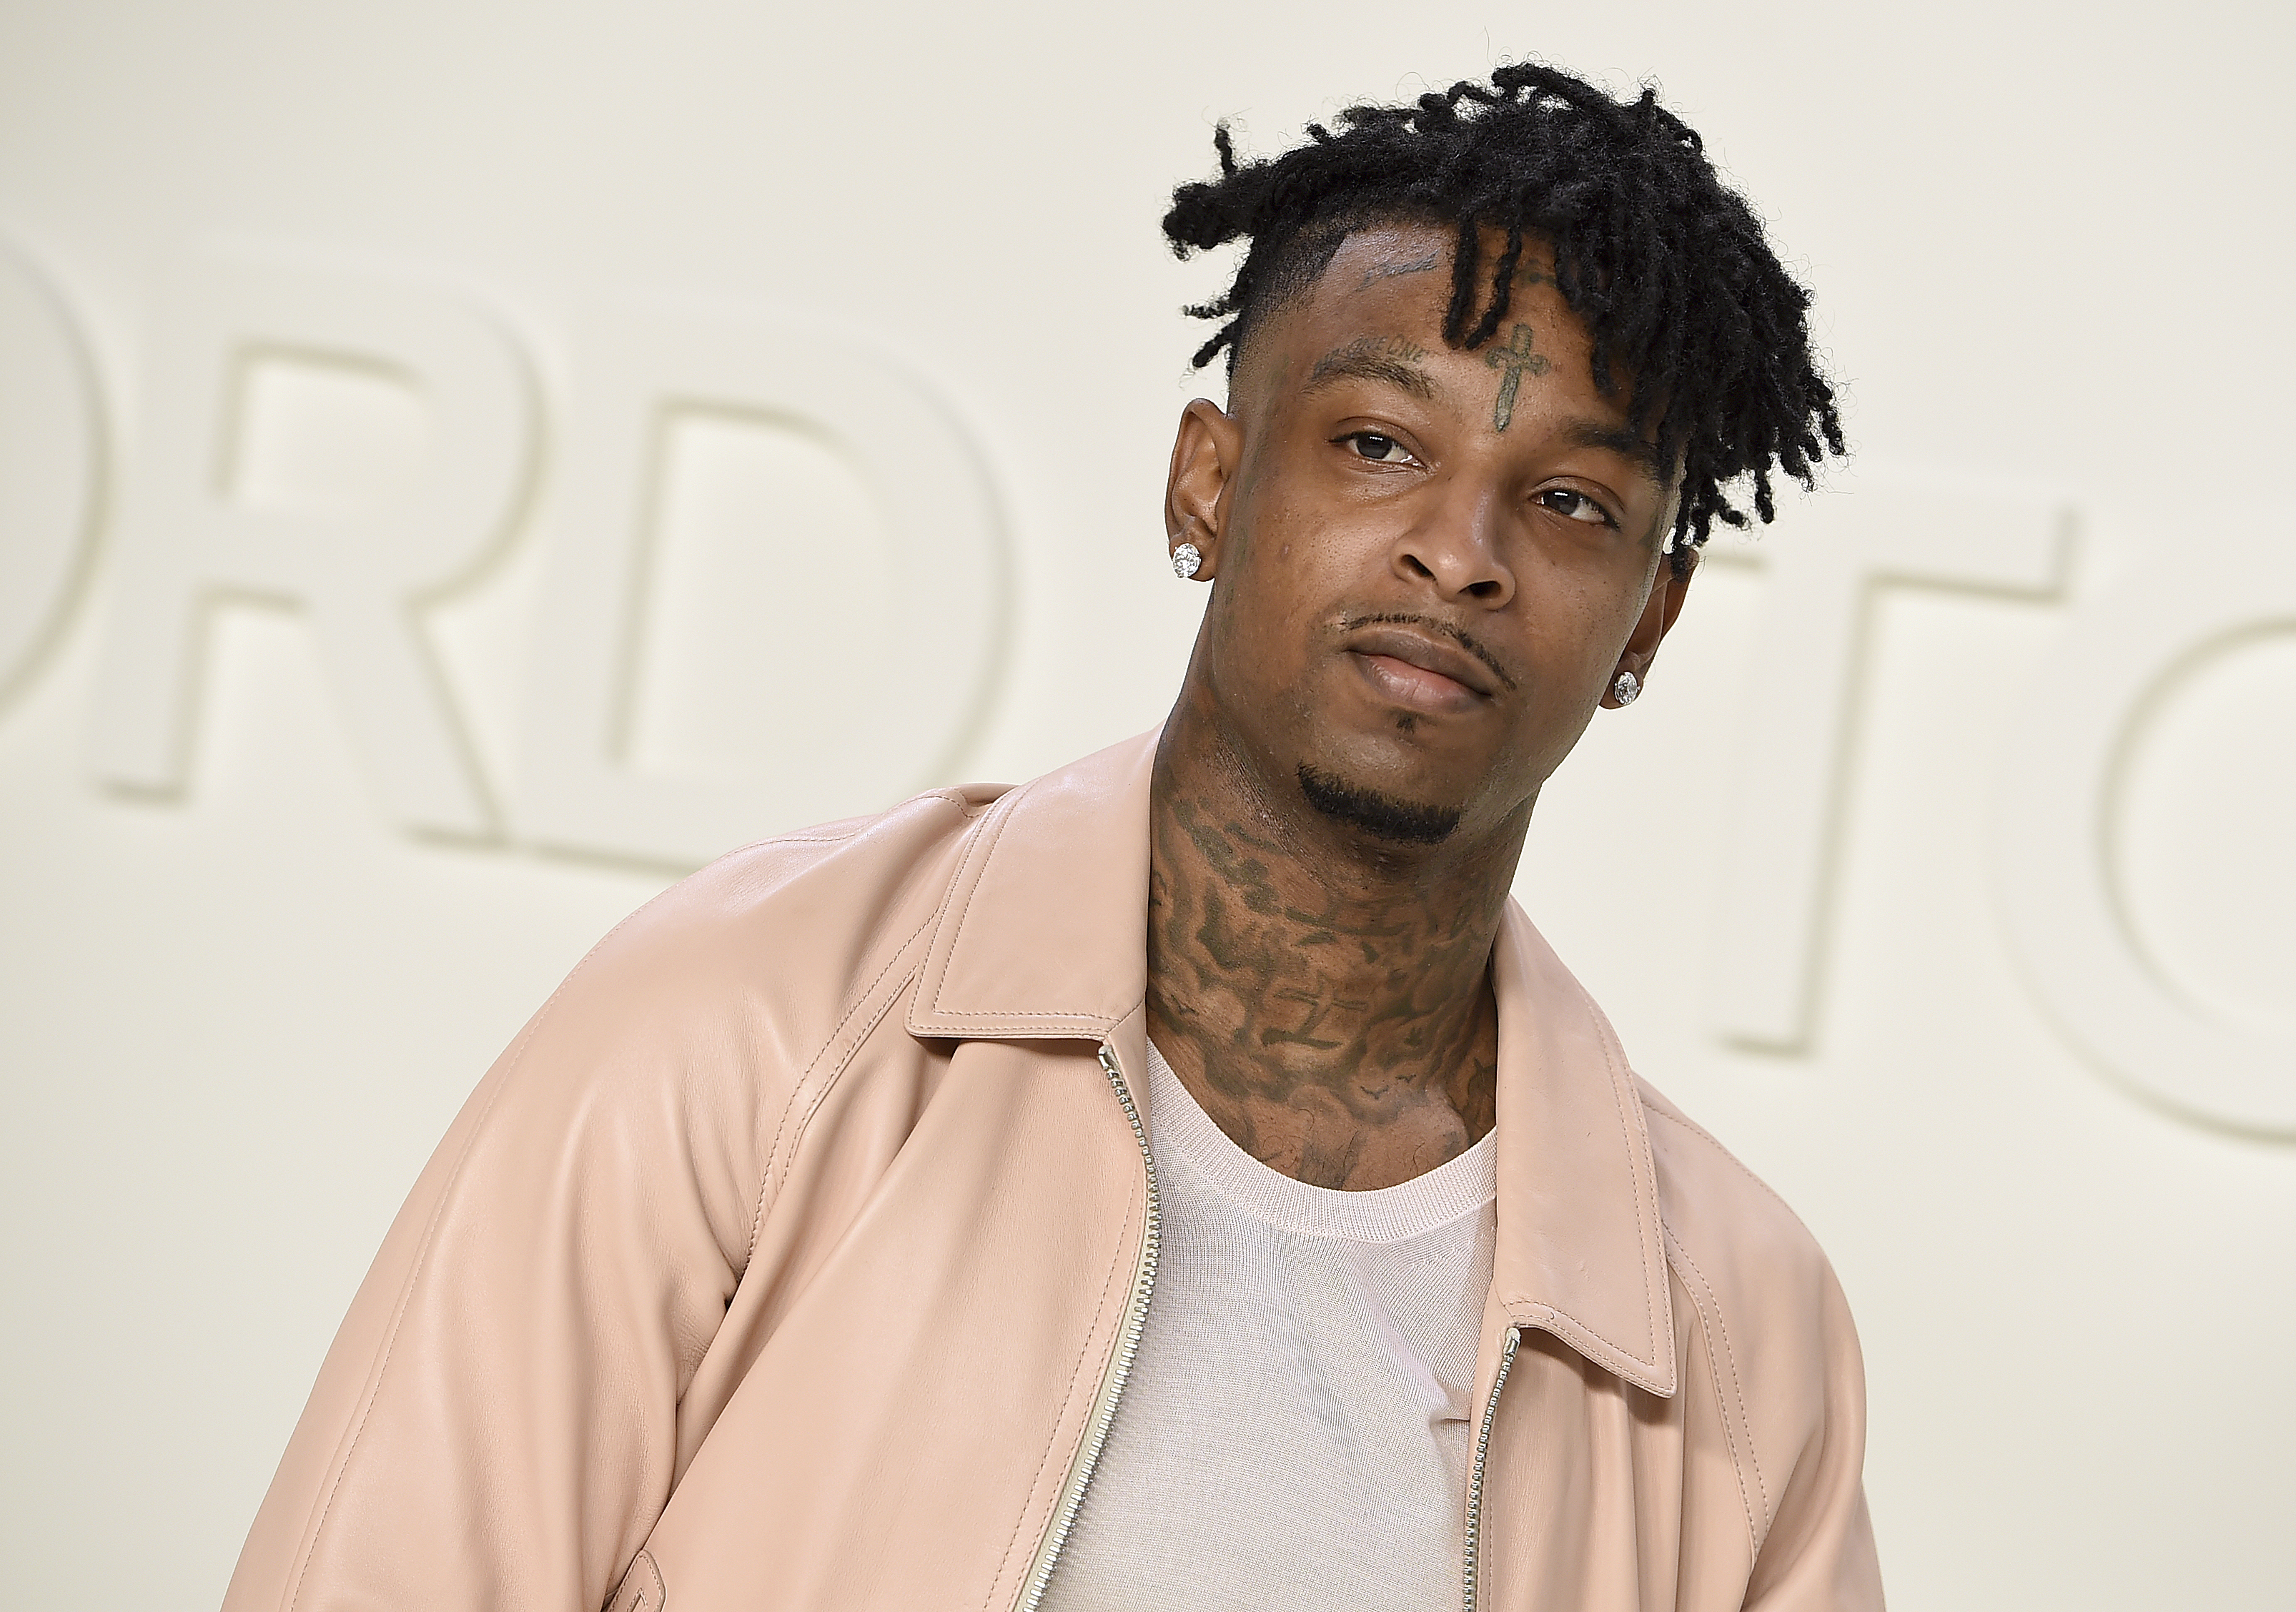 FILE - 21 Savage attends the Tom Ford show during NYFW Fall/Winter in Los Angeles, Feb. 7, 2020. (Photo by Jordan Strauss/Invision/AP, File)